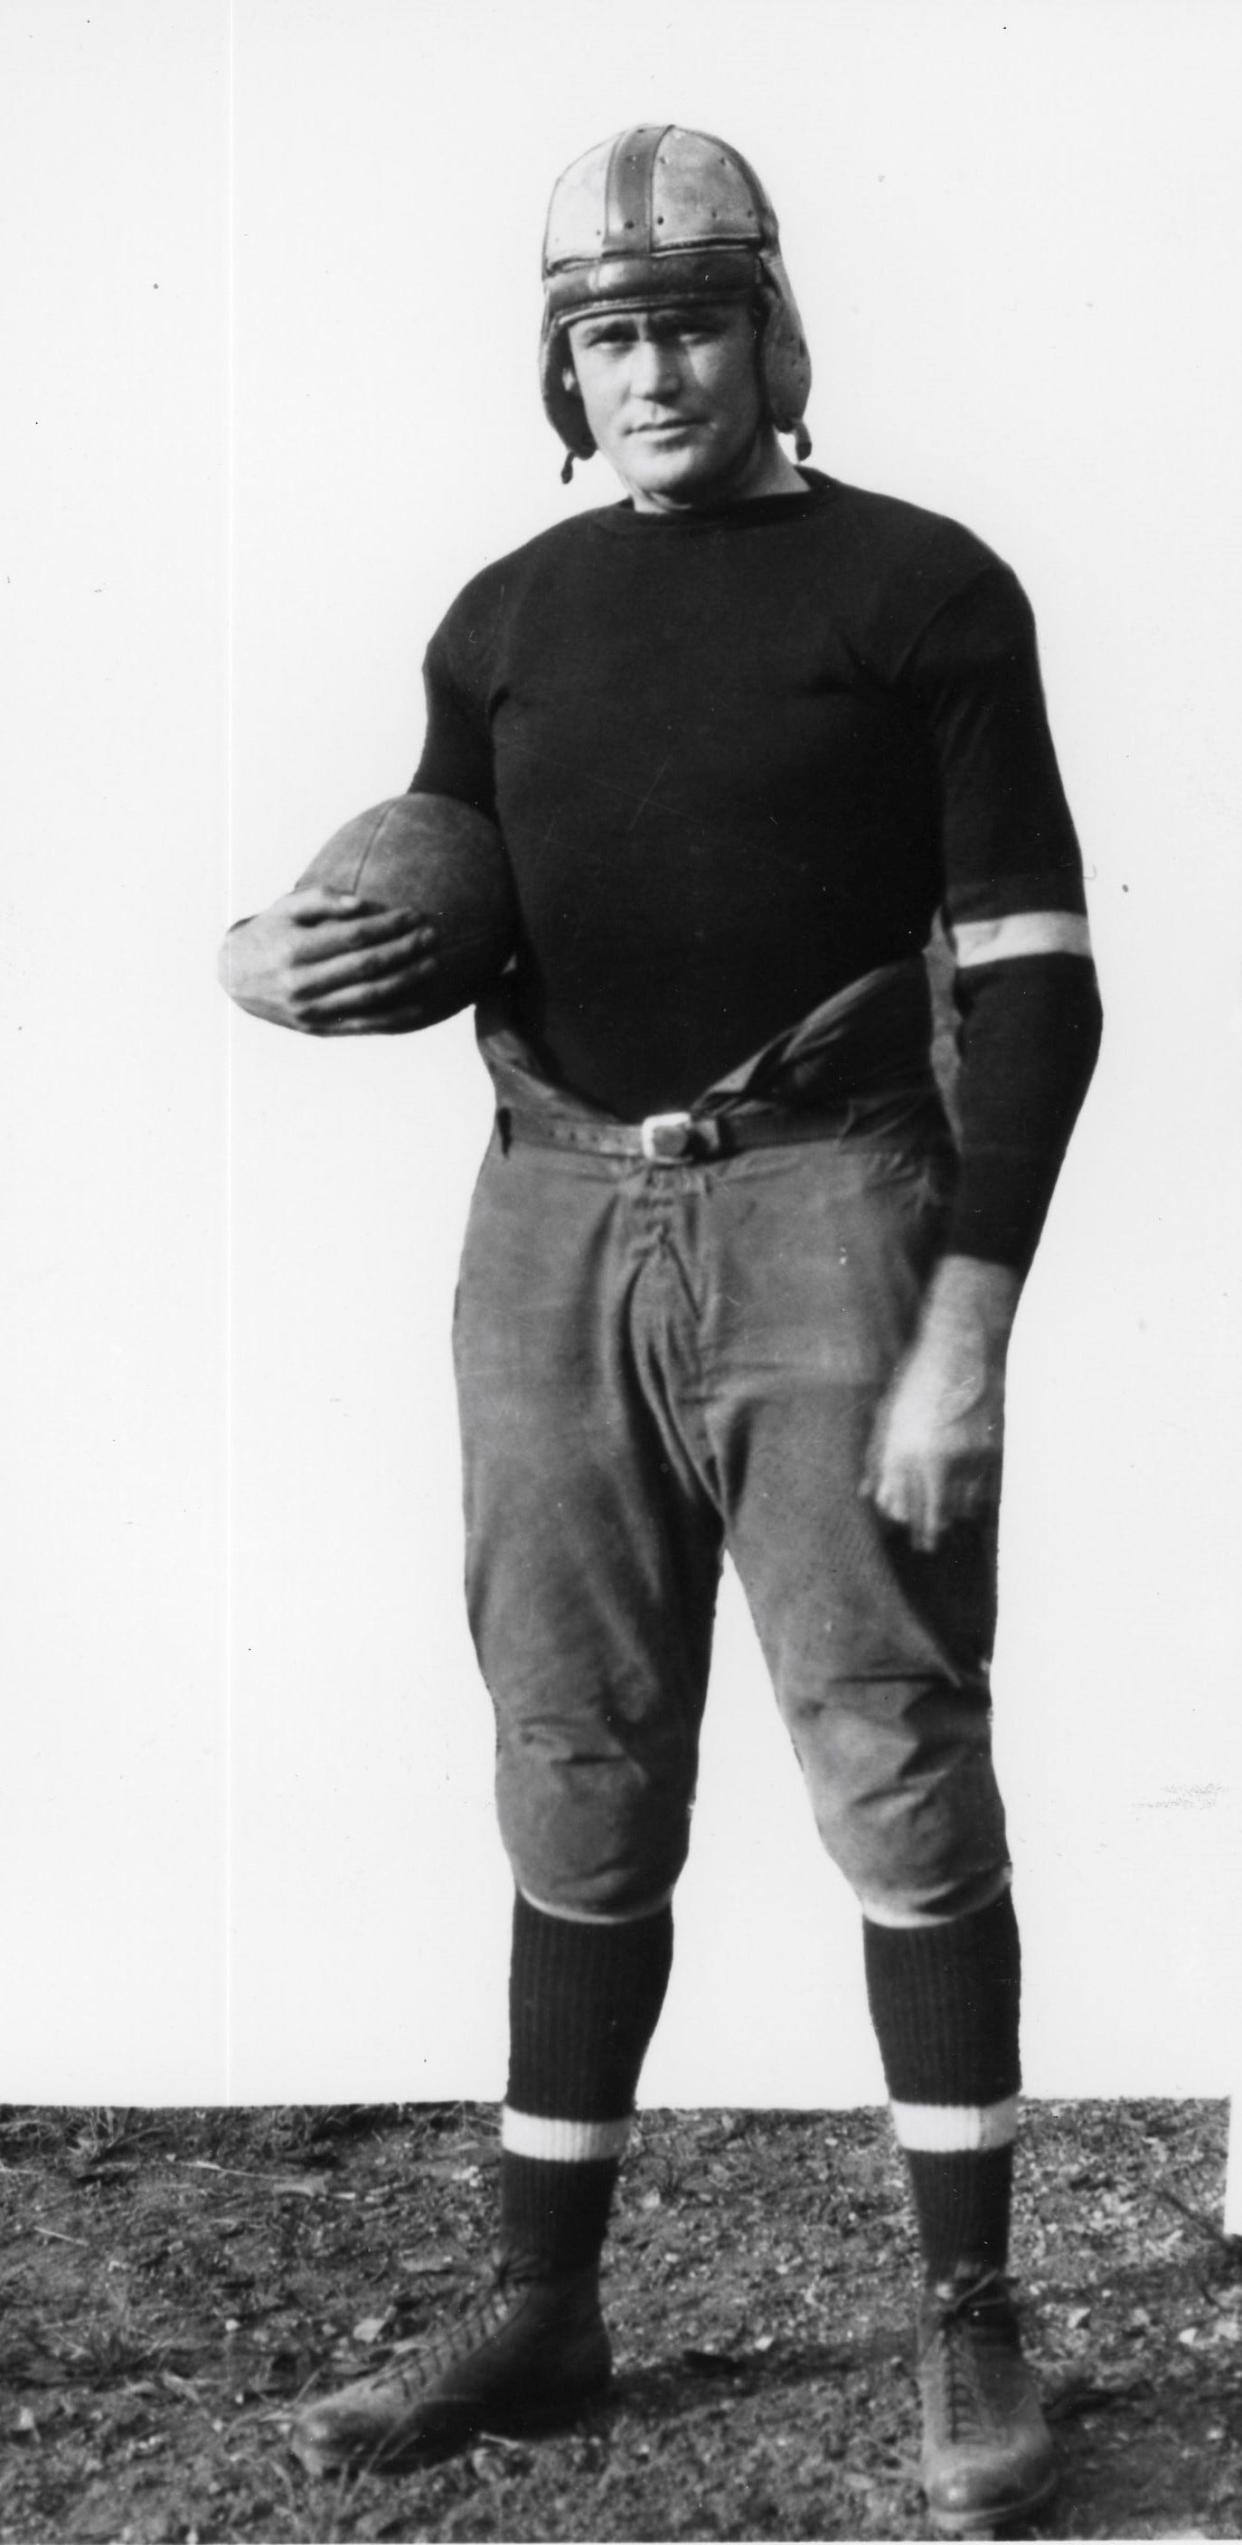 Graham Vowell was the captain of the 1916 Tennessee football team.